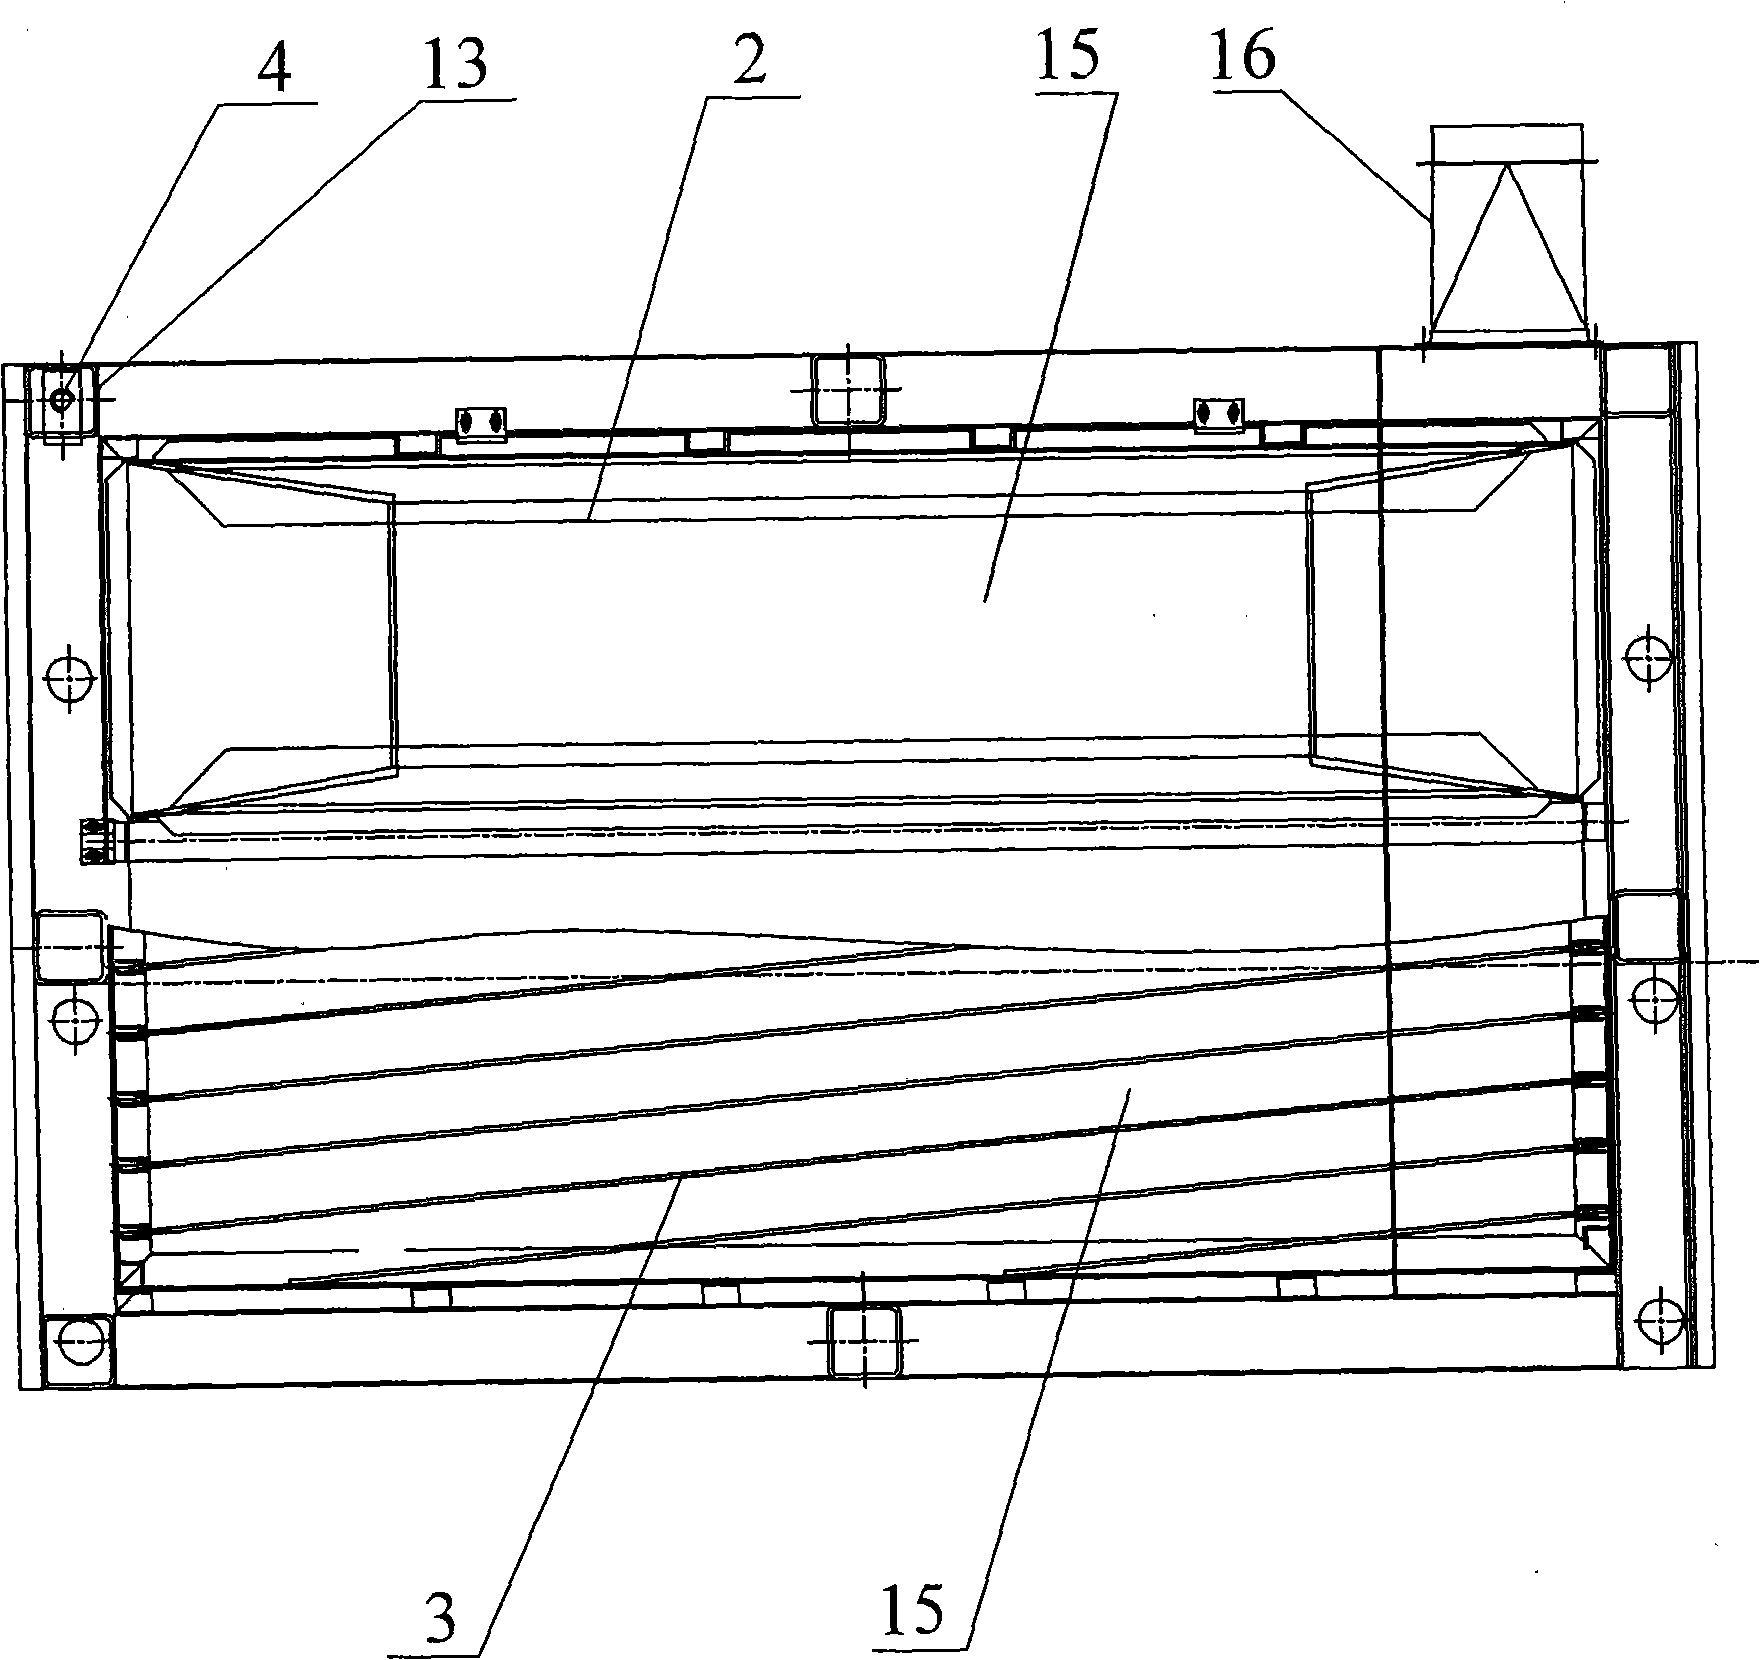 Air exhaust integration workstation device